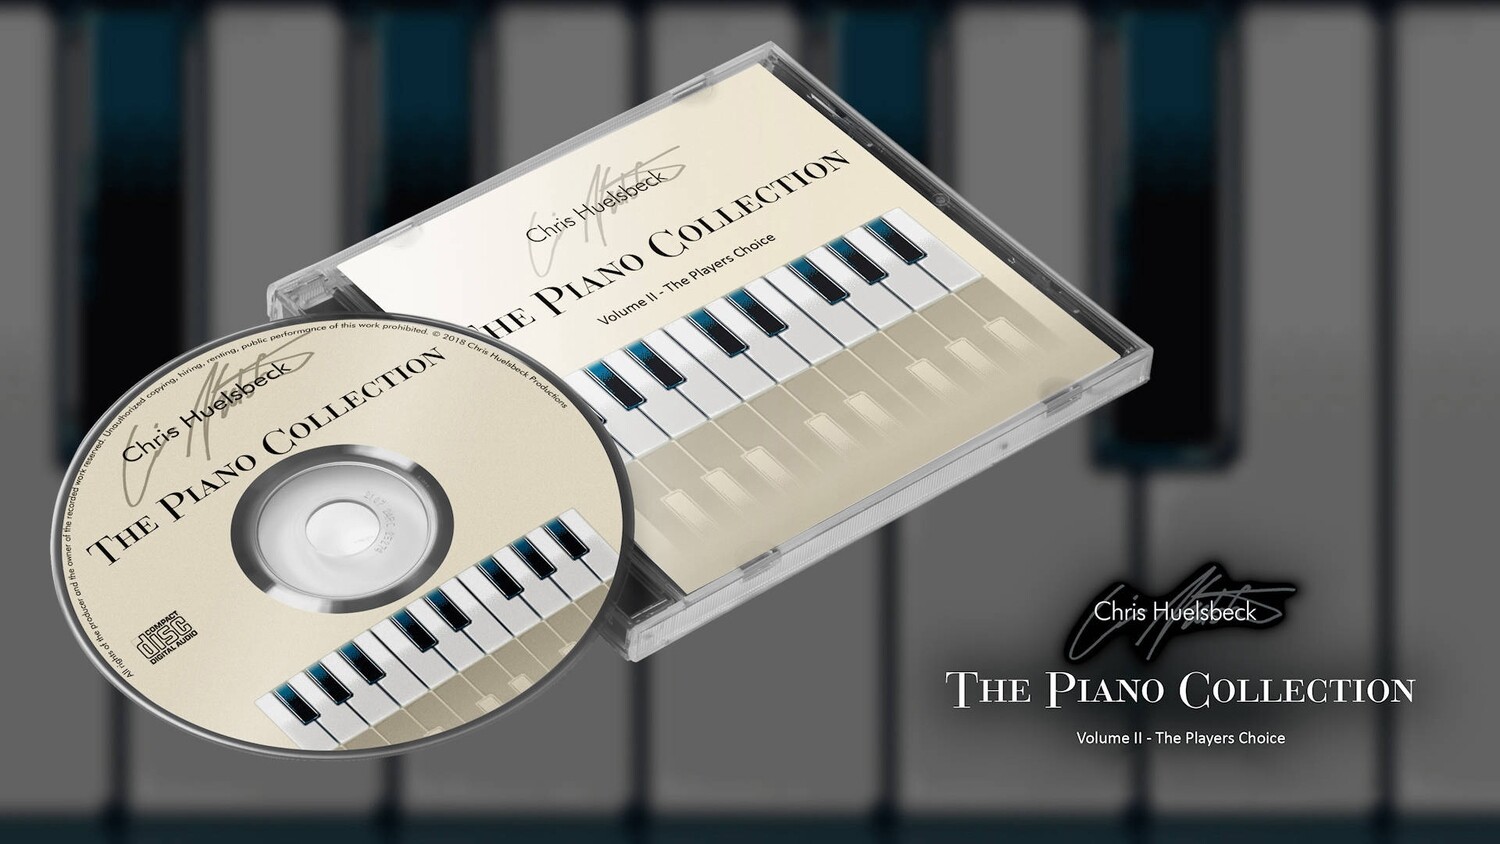 Chris Huelsbeck The Piano Collection - Volume II: The Players Choice AUDIO CD